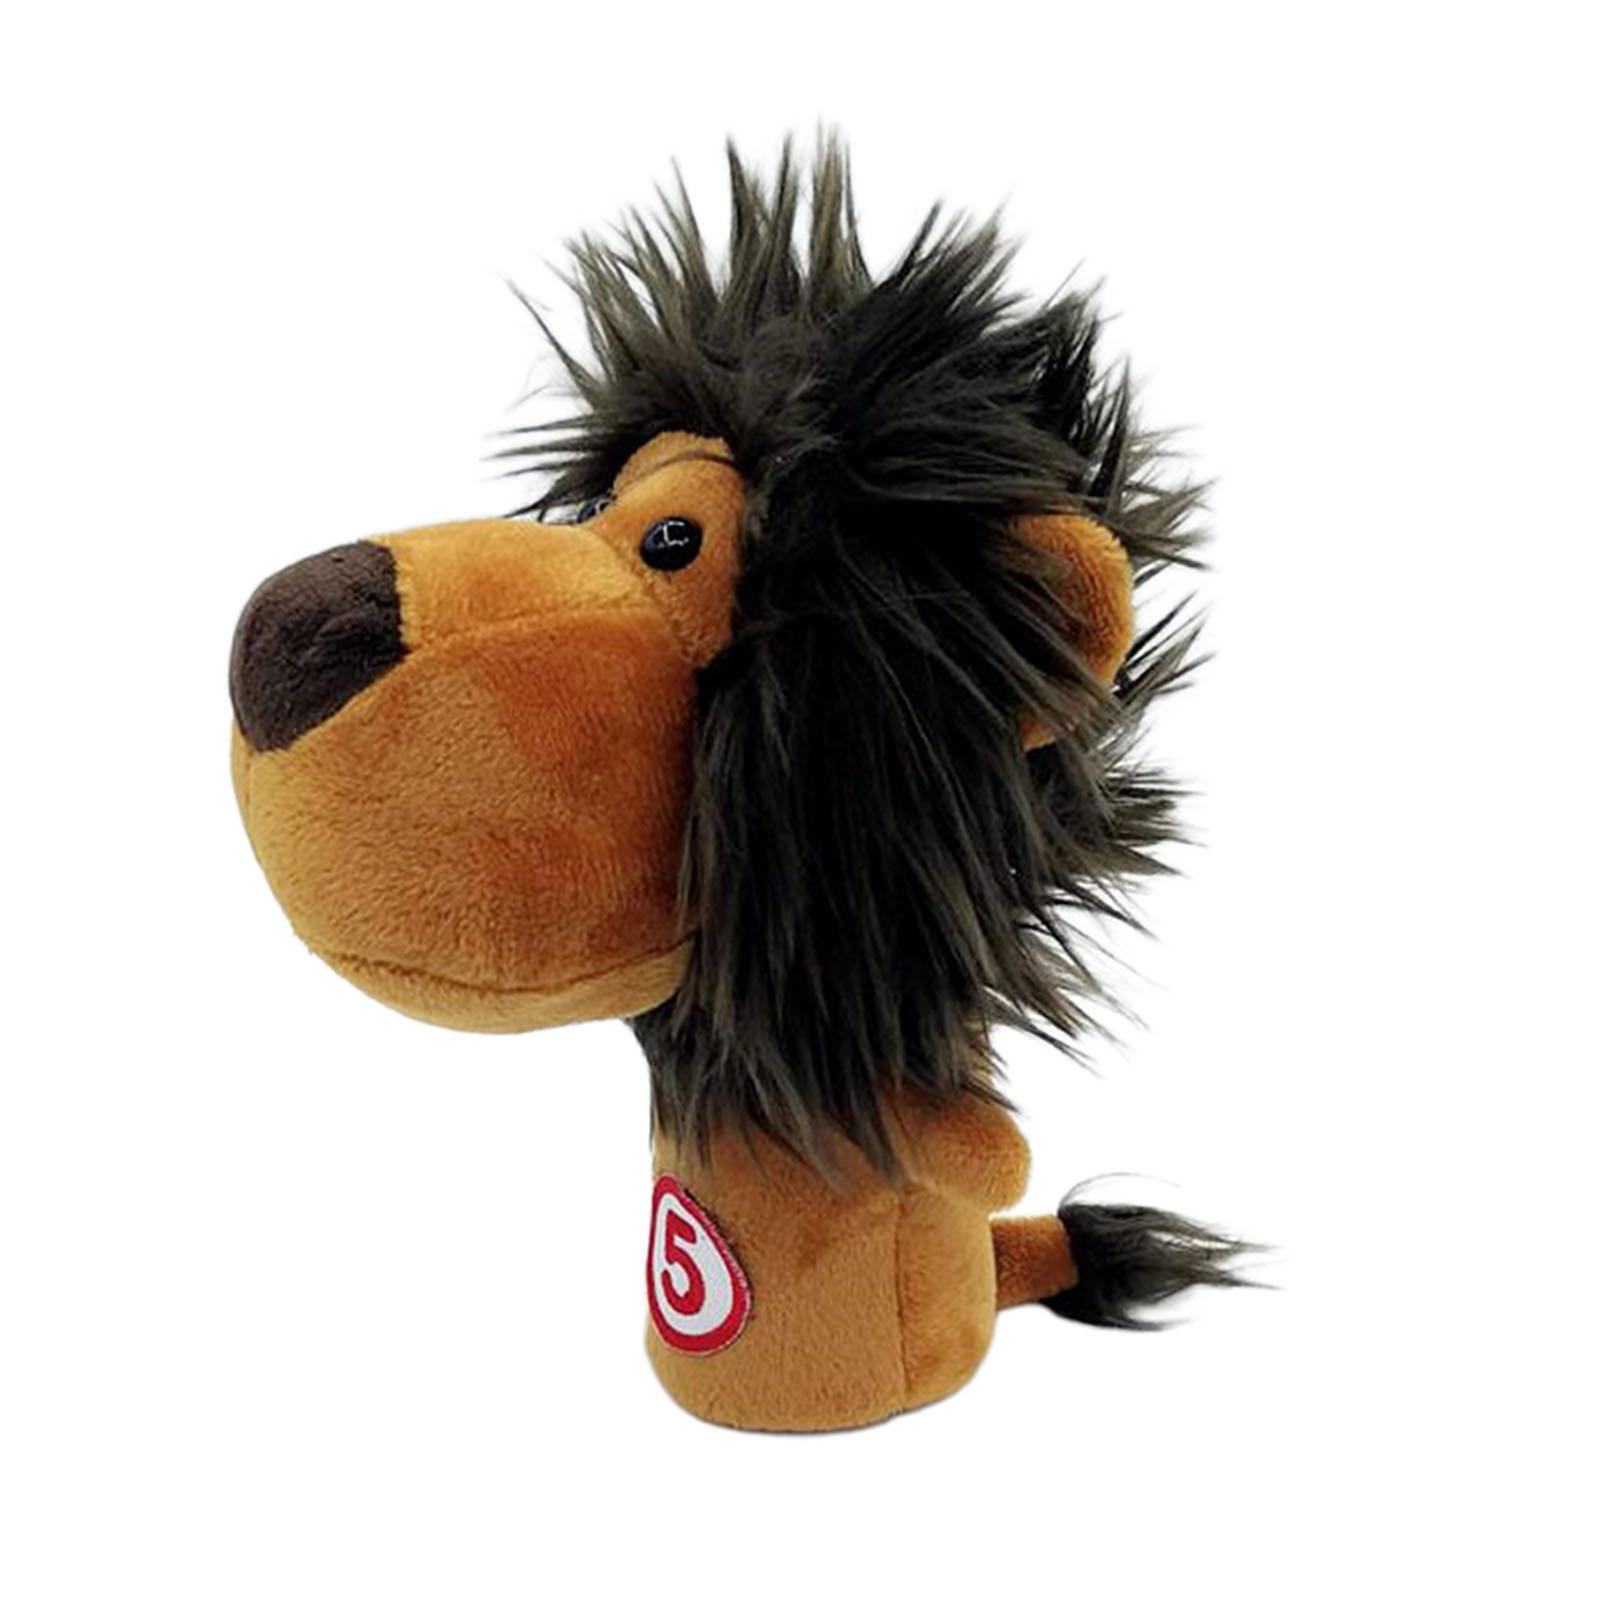 Novelty Plush Animal Golf Iron Headcover Wedges Club Head Cover Lion No.5